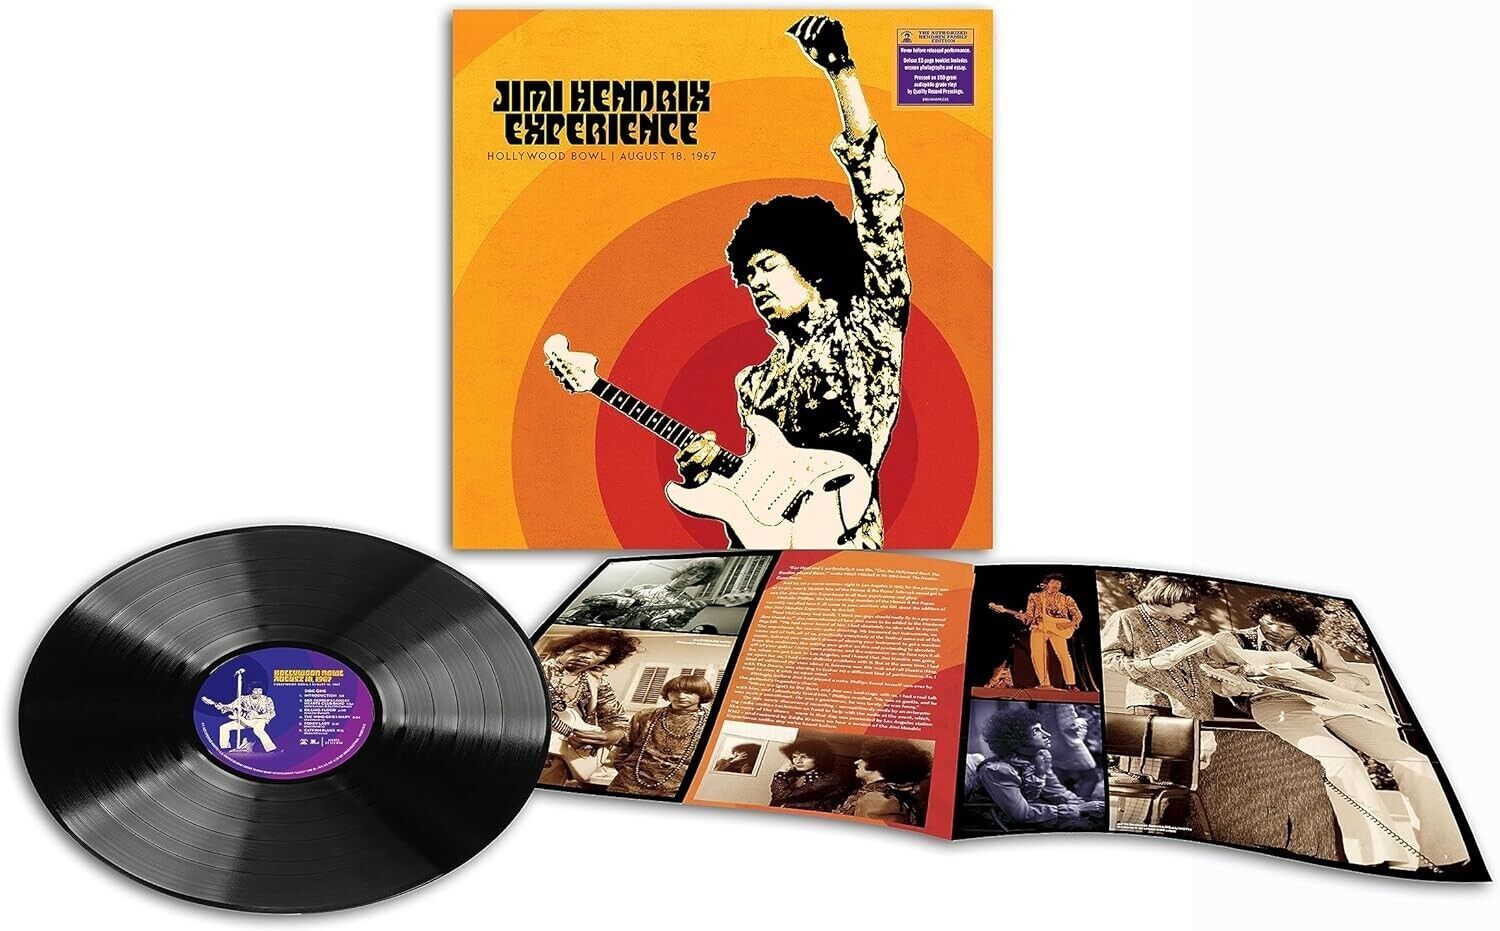 Jimi Hendrix Experience: Live At The Hollywood Bowl: August 18, 1967 LP